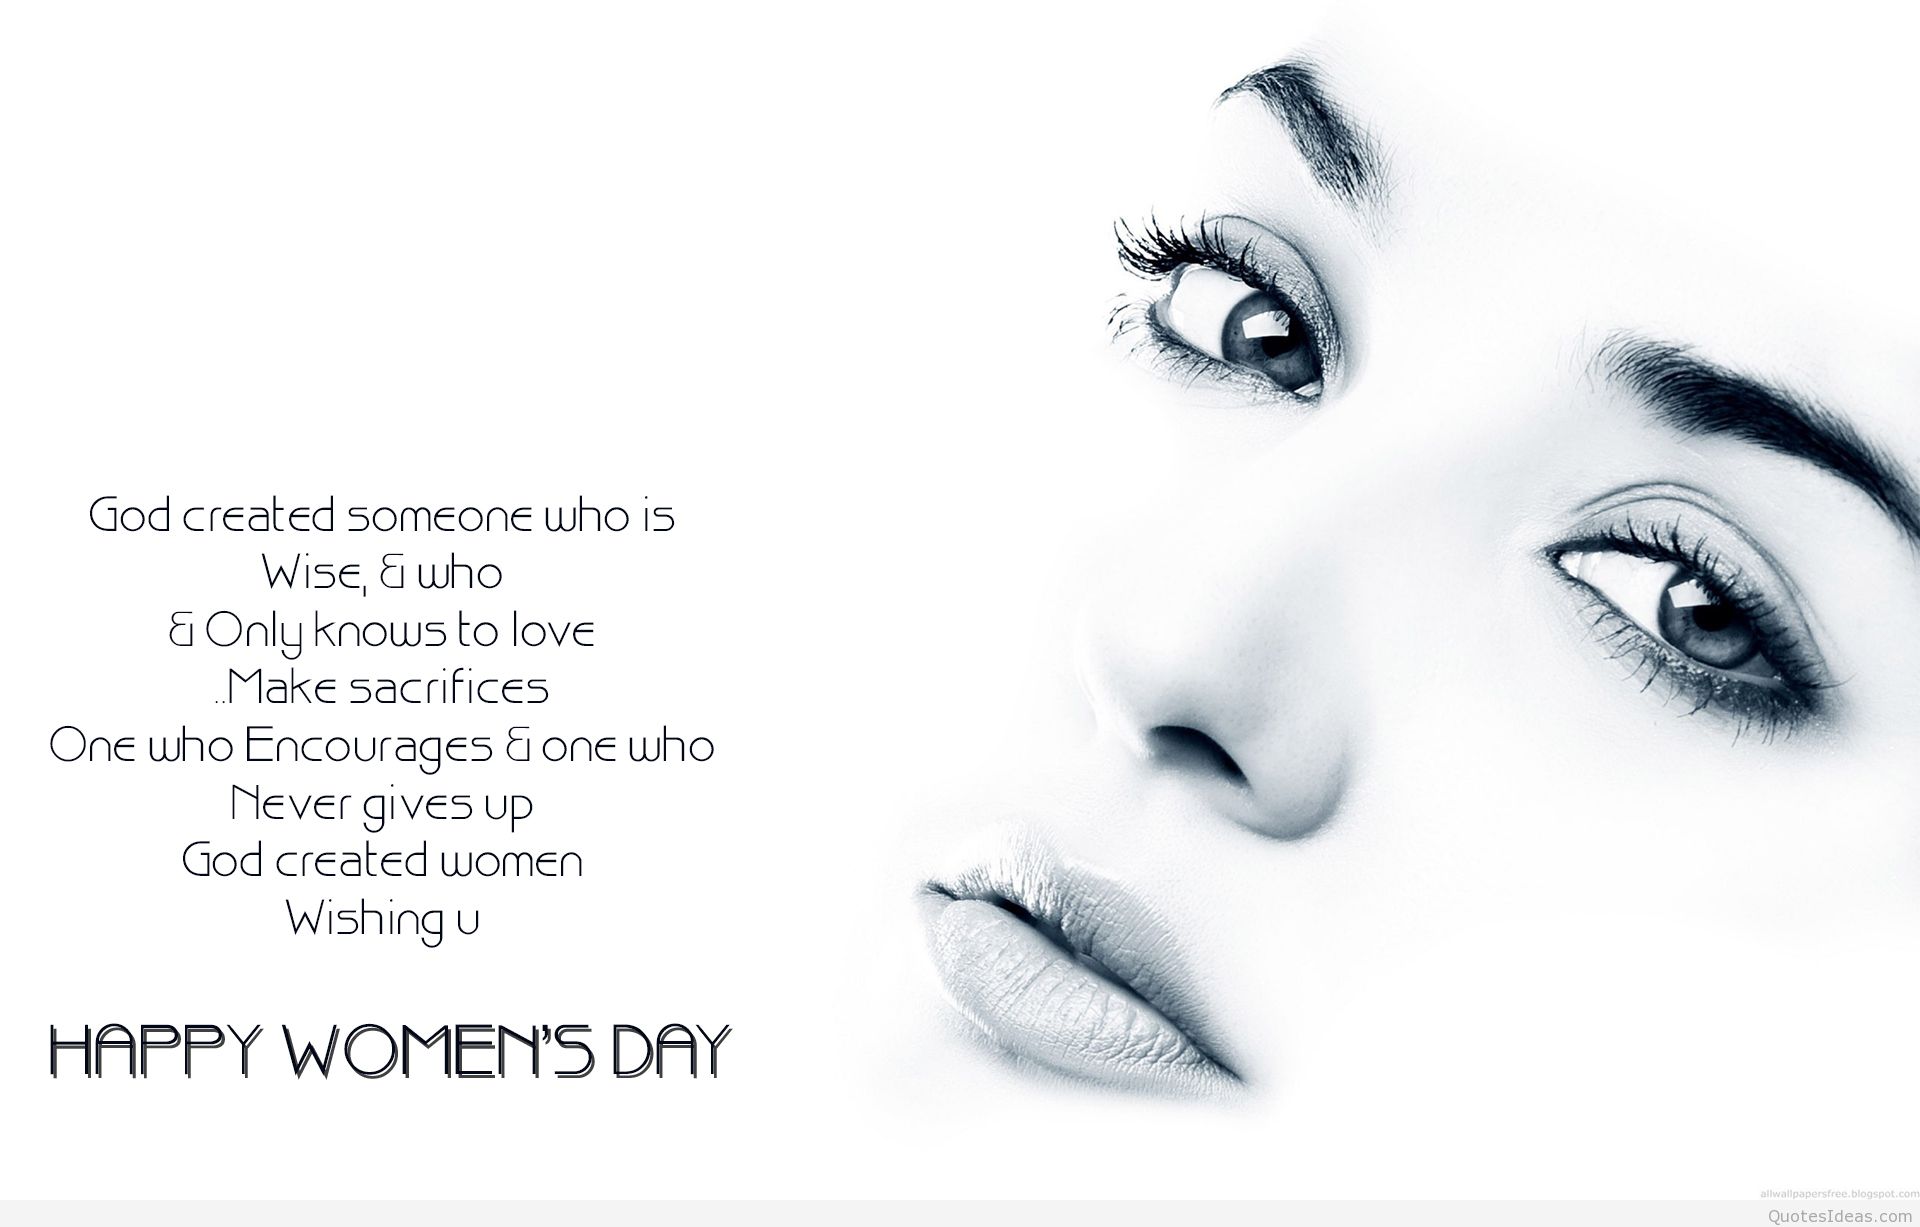 Happy Women's Day 2016 sms wishes quotes greetings (2)